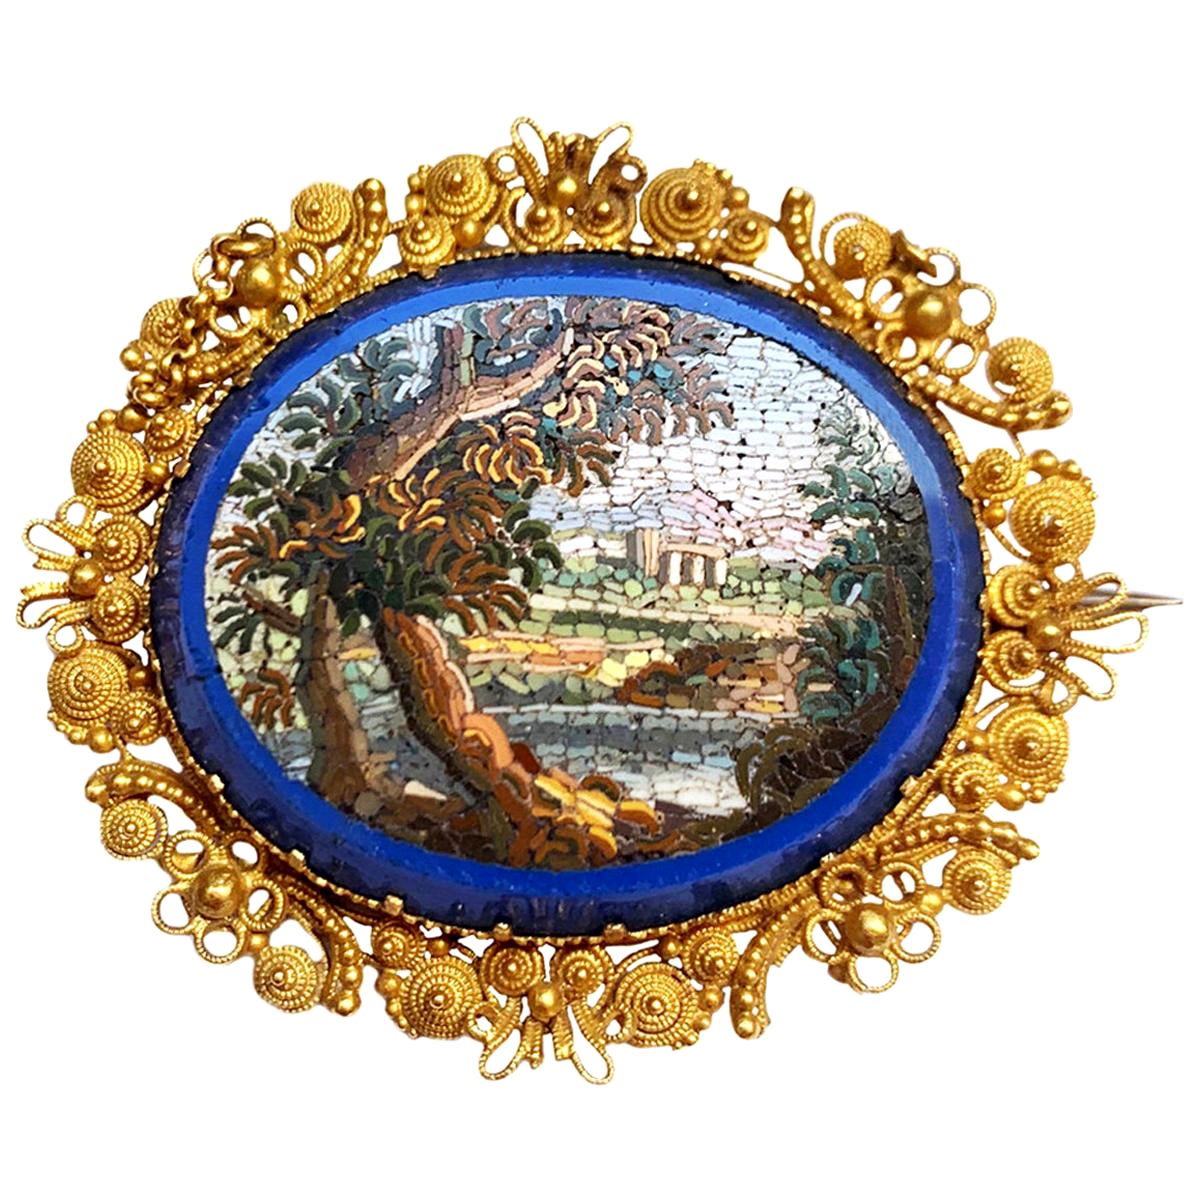 Gold Brooch-Pendant with Micromosaic from "Studio Vaticano del Mosaico" Mid-1800 For Sale